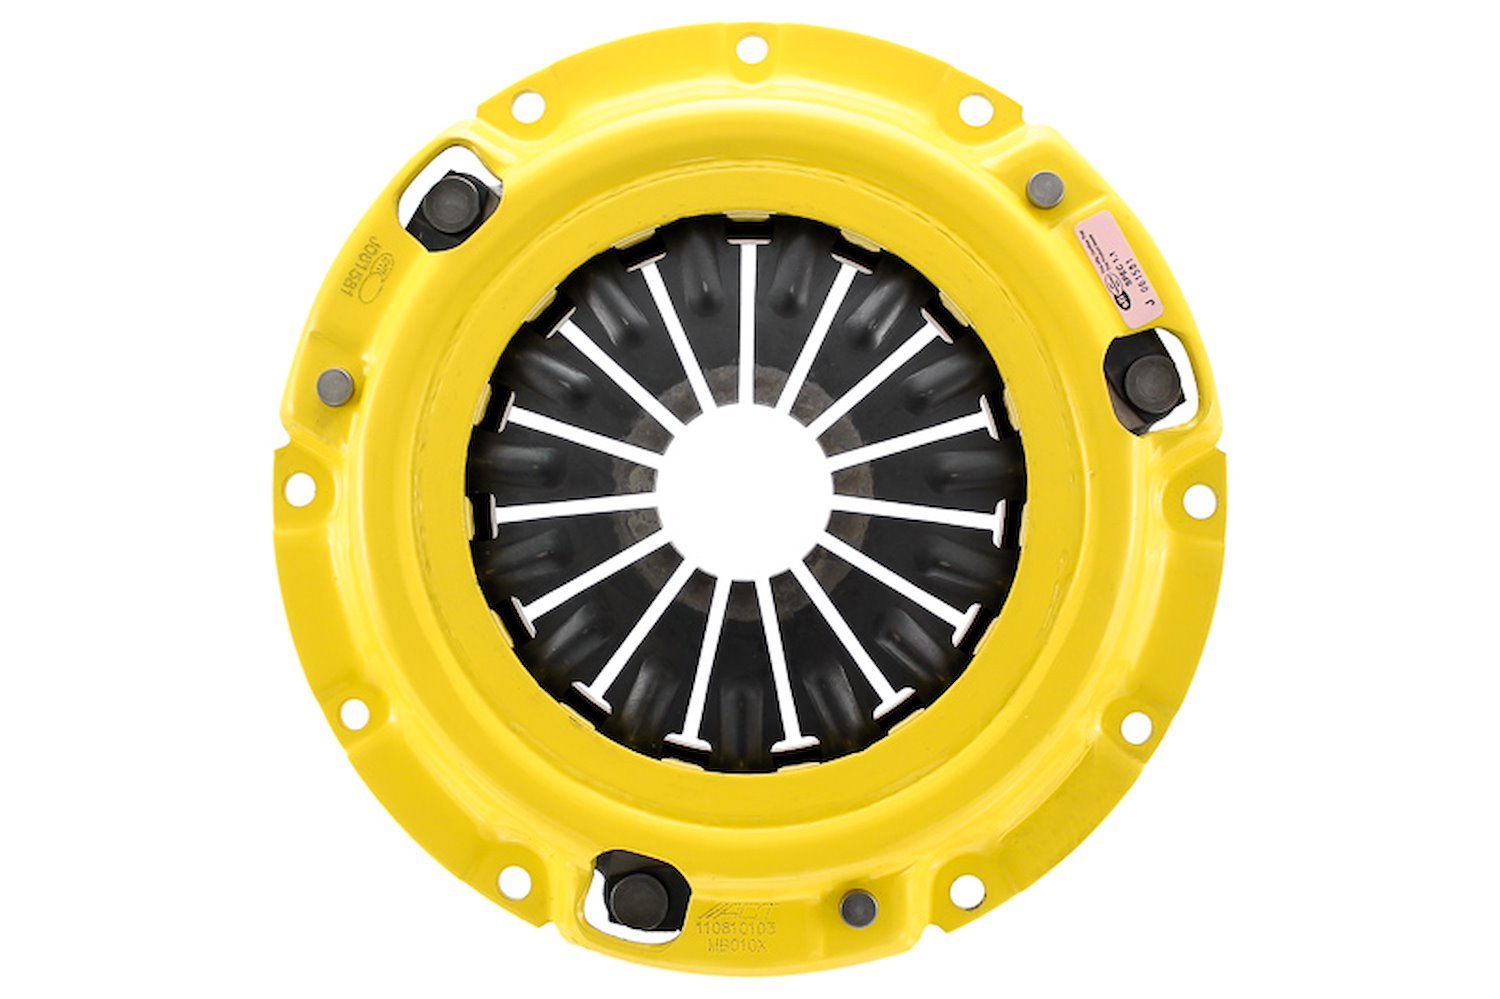 Xtreme Transmission Clutch Pressure Plate Fits Select Chrysler/Dodge/Eagle/Mitsubishi/Plymouth